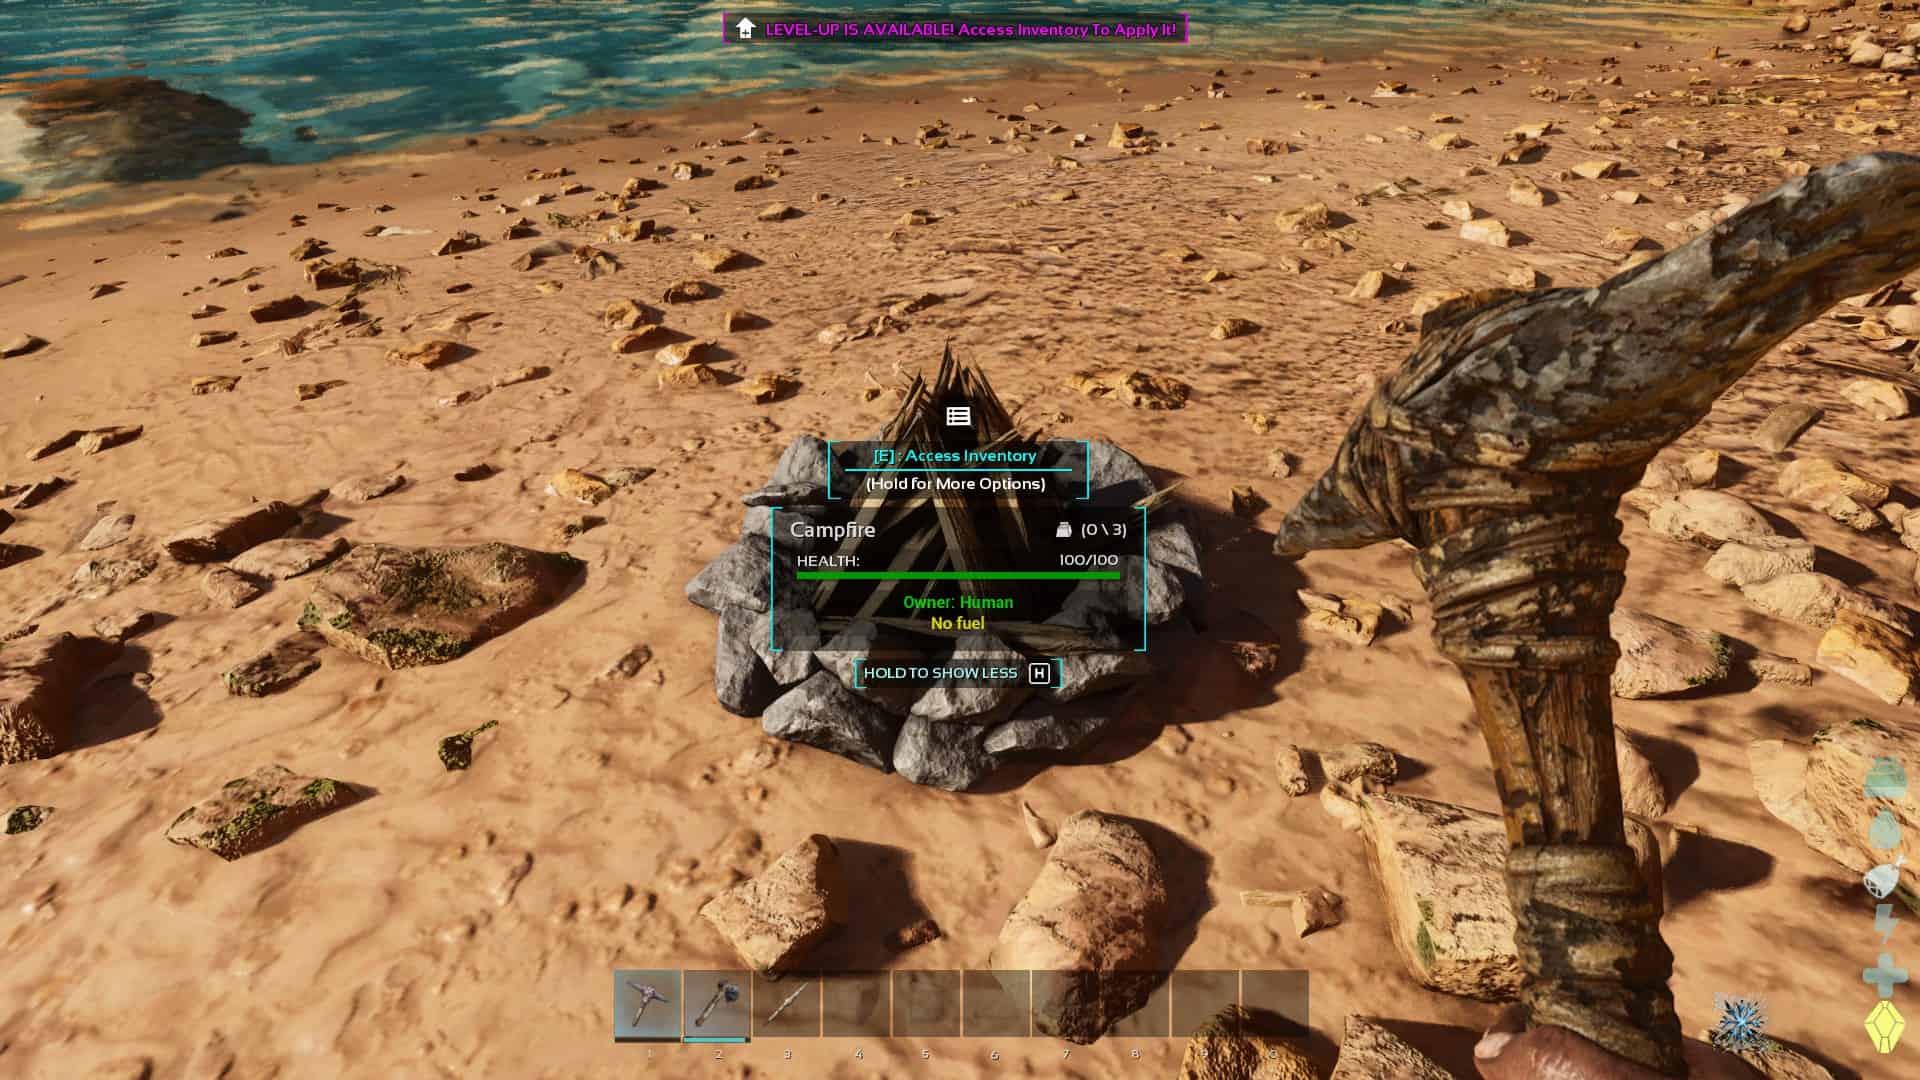 ARK Survival Ascended how to light campfire: An unlit campfire on a beach.